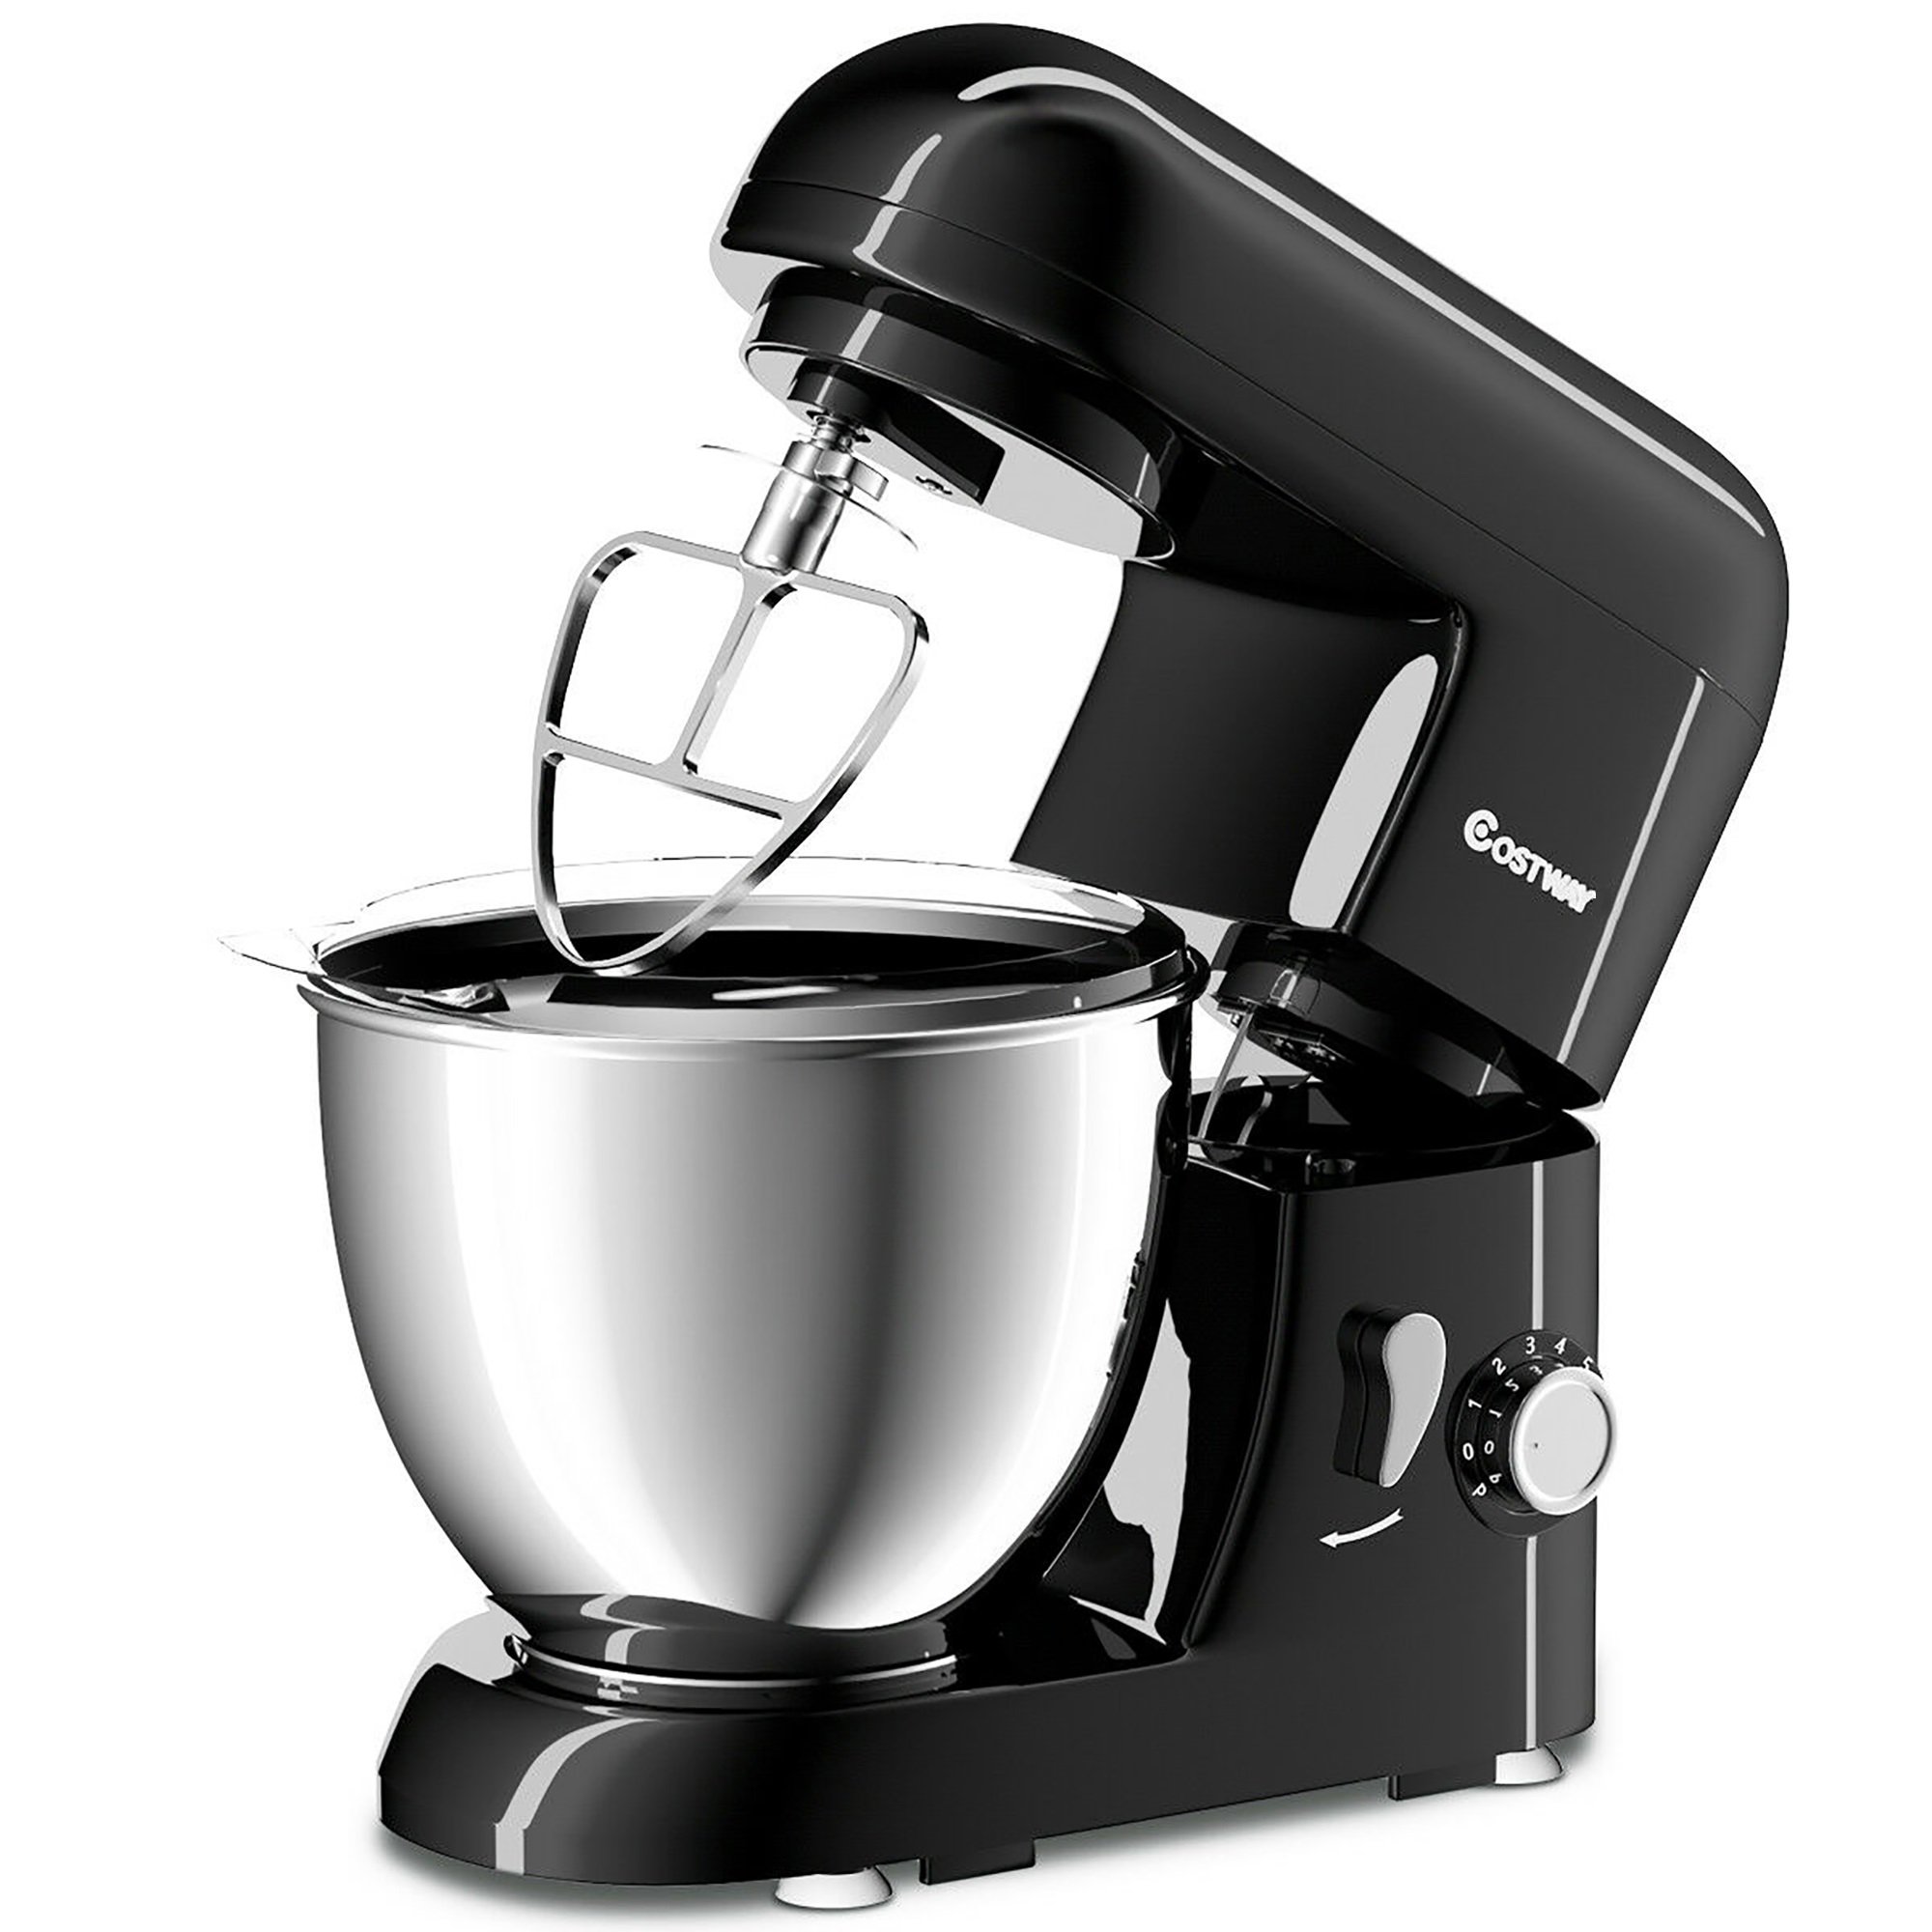 Costway Electric Food Stand Mixer 6 Speed 4.3Qt 550W Tilt-Head Stainless Steel Bowl New - image 5 of 9